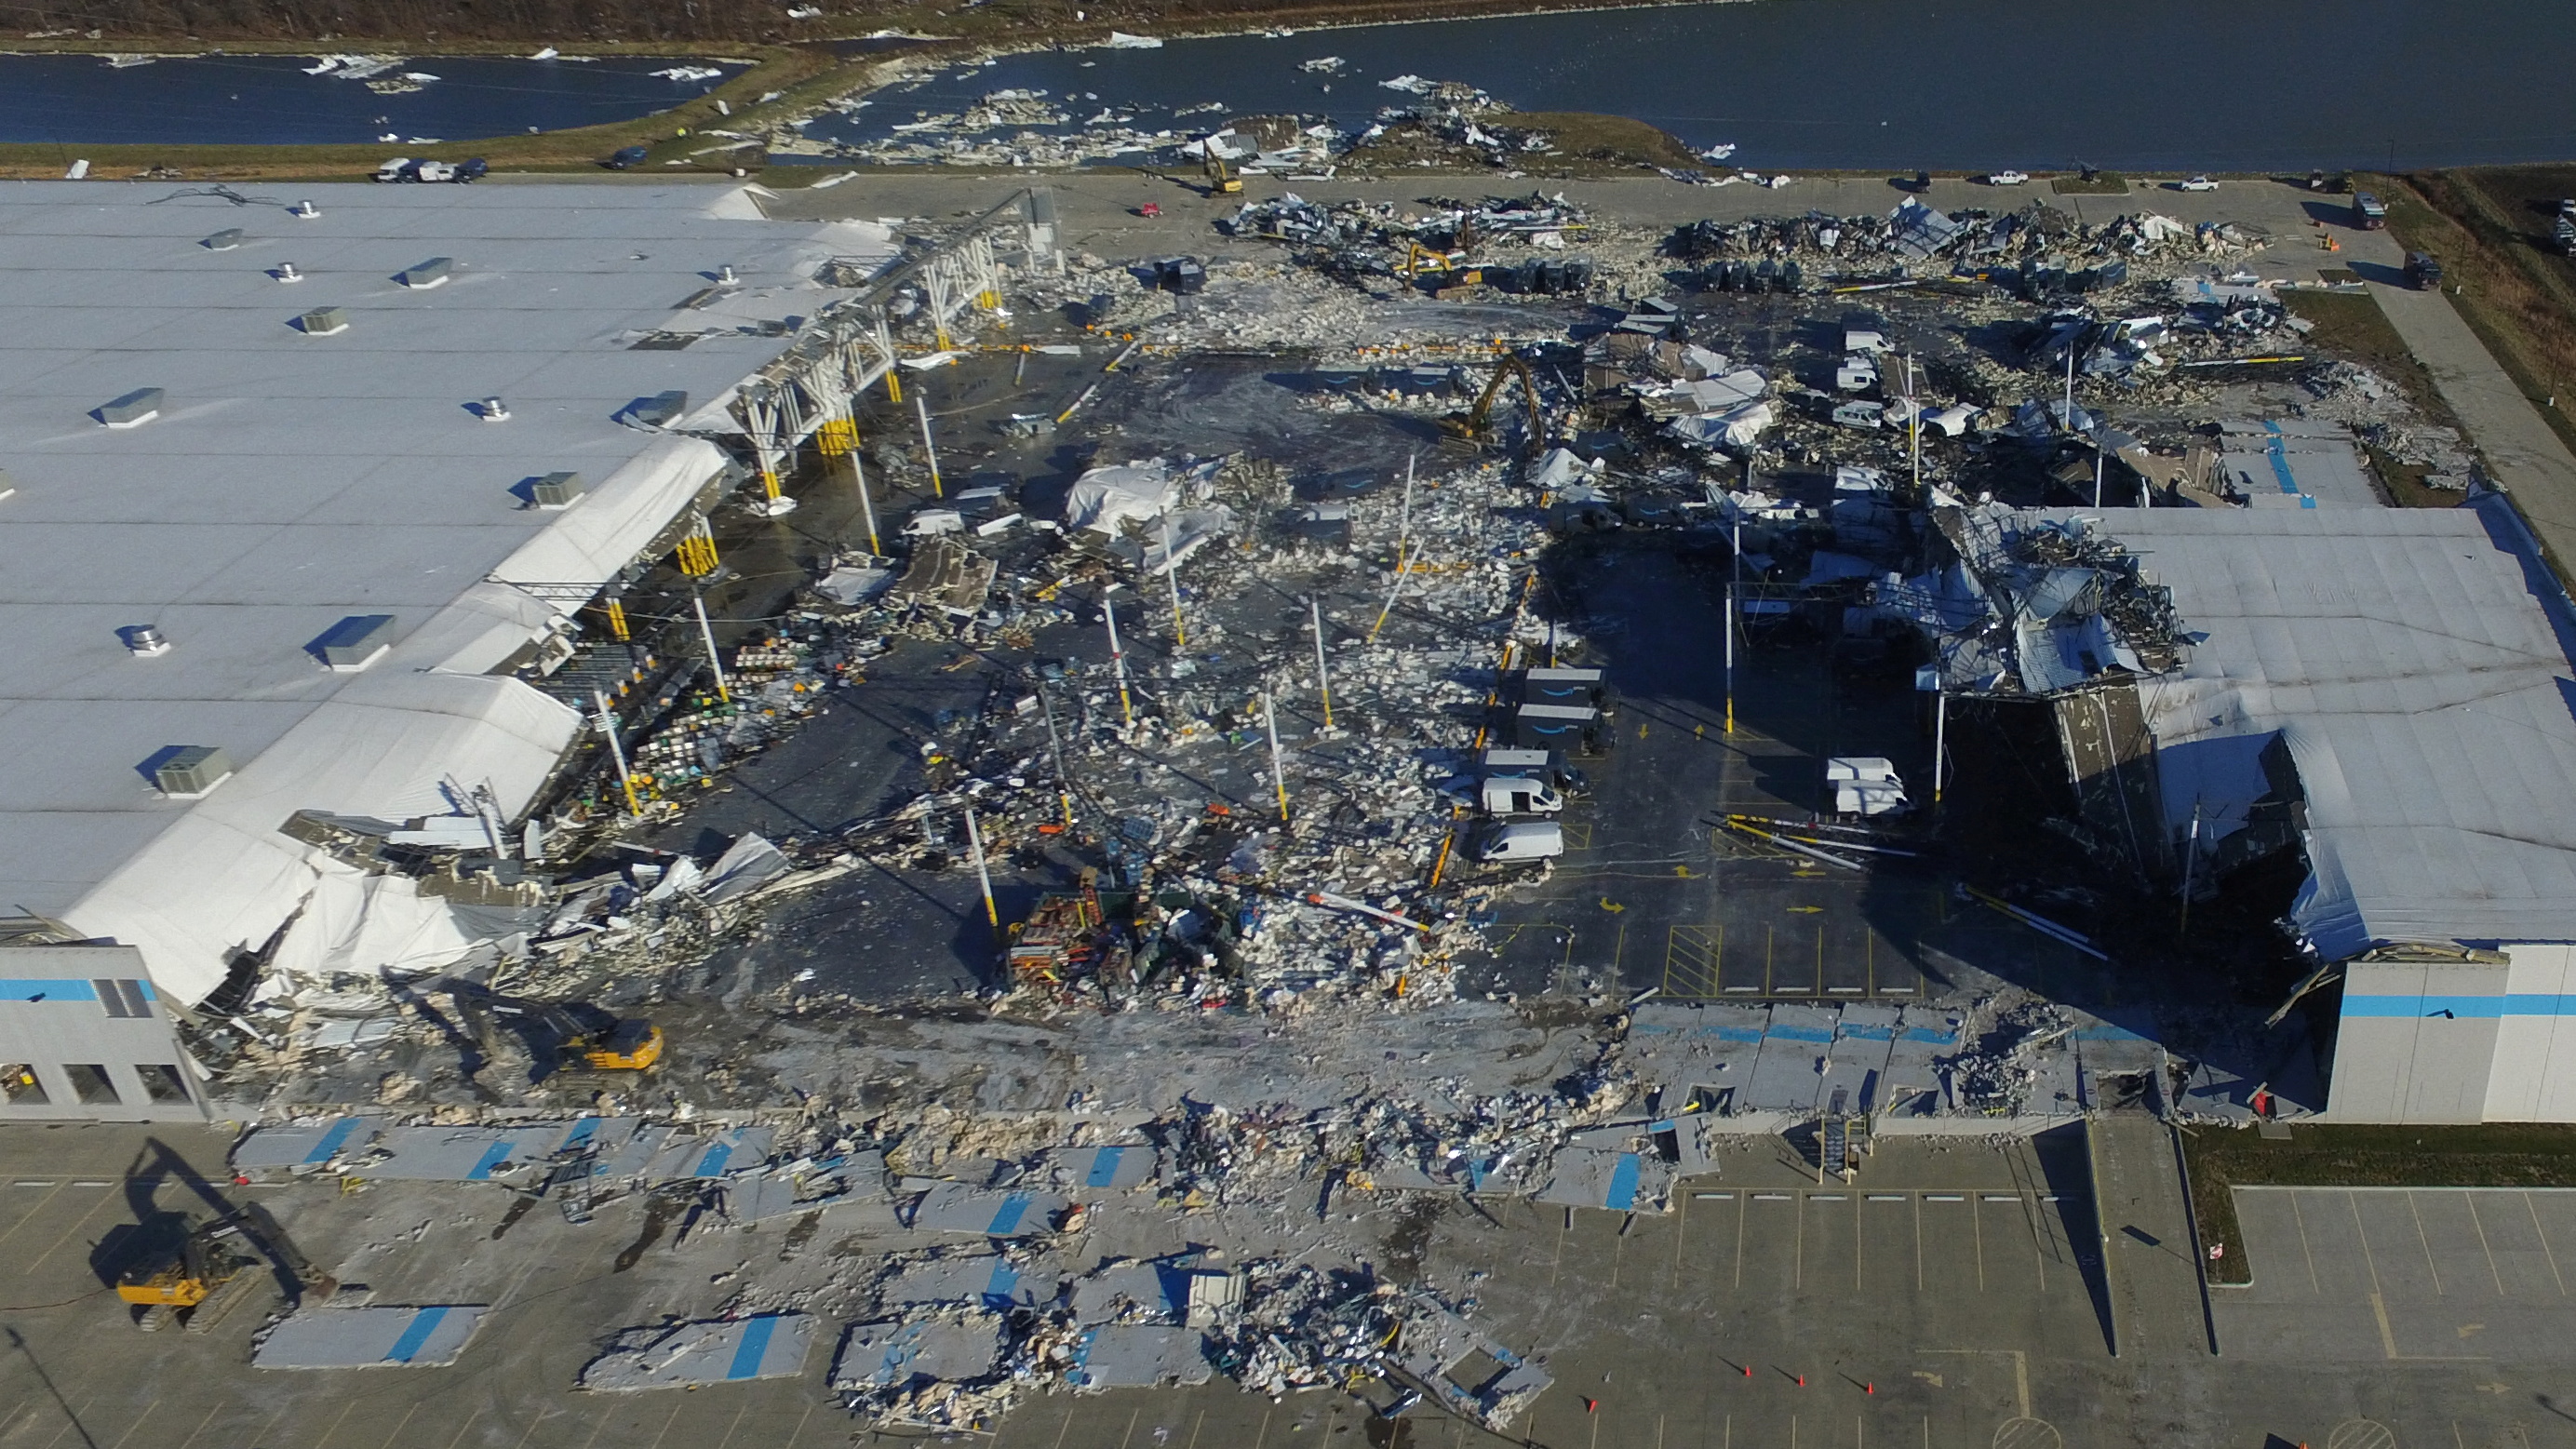 The site of a roof collapse at an Amazon.com distribution centre a day after a series of tornadoes dealt a blow to several U.S. states, in Edwardsville, Illinois, U.S. December 11, 2021.  REUTERS/Drone Base